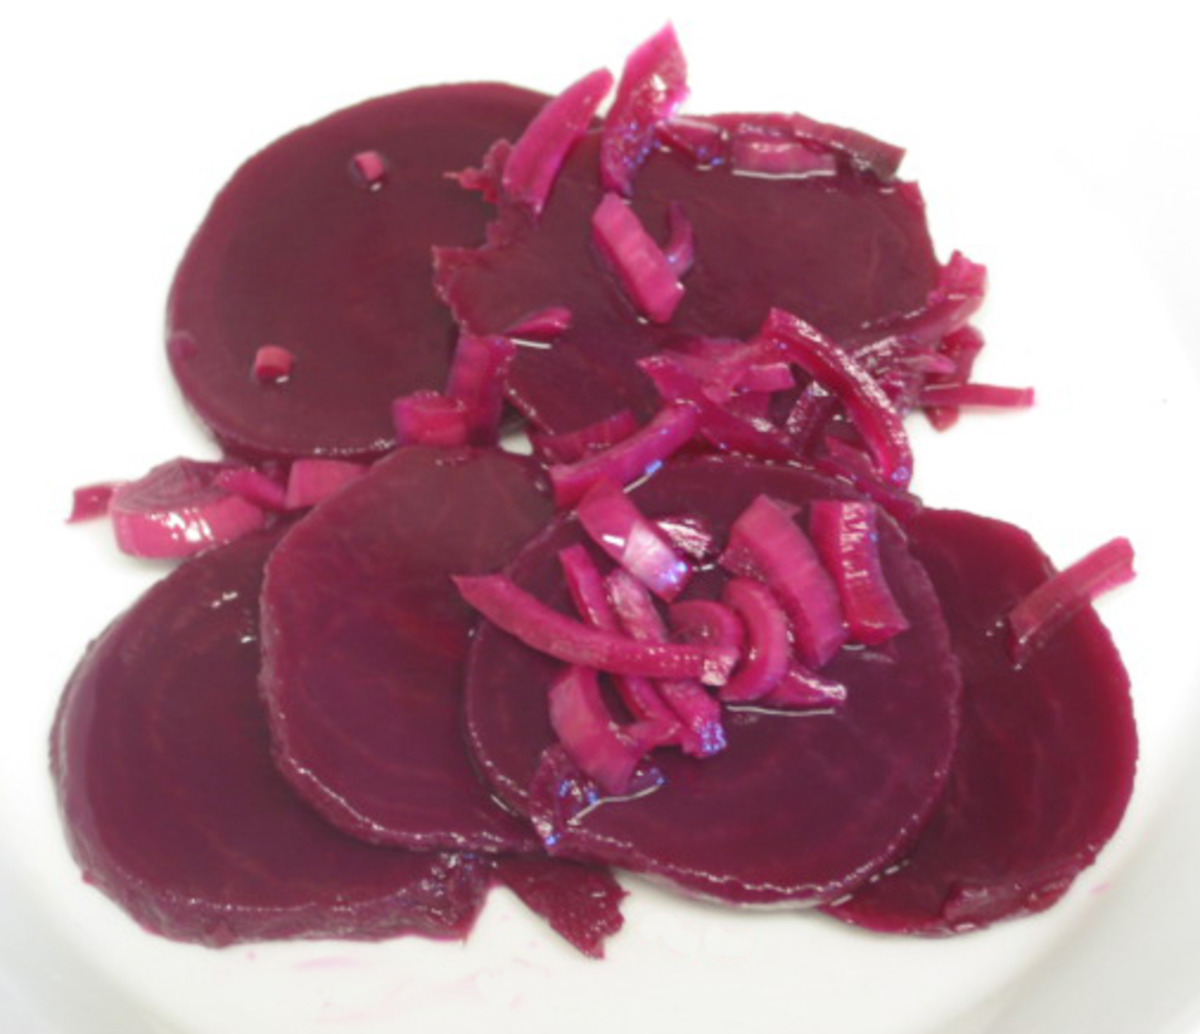 Simple Easy Pickled Beets Recipe